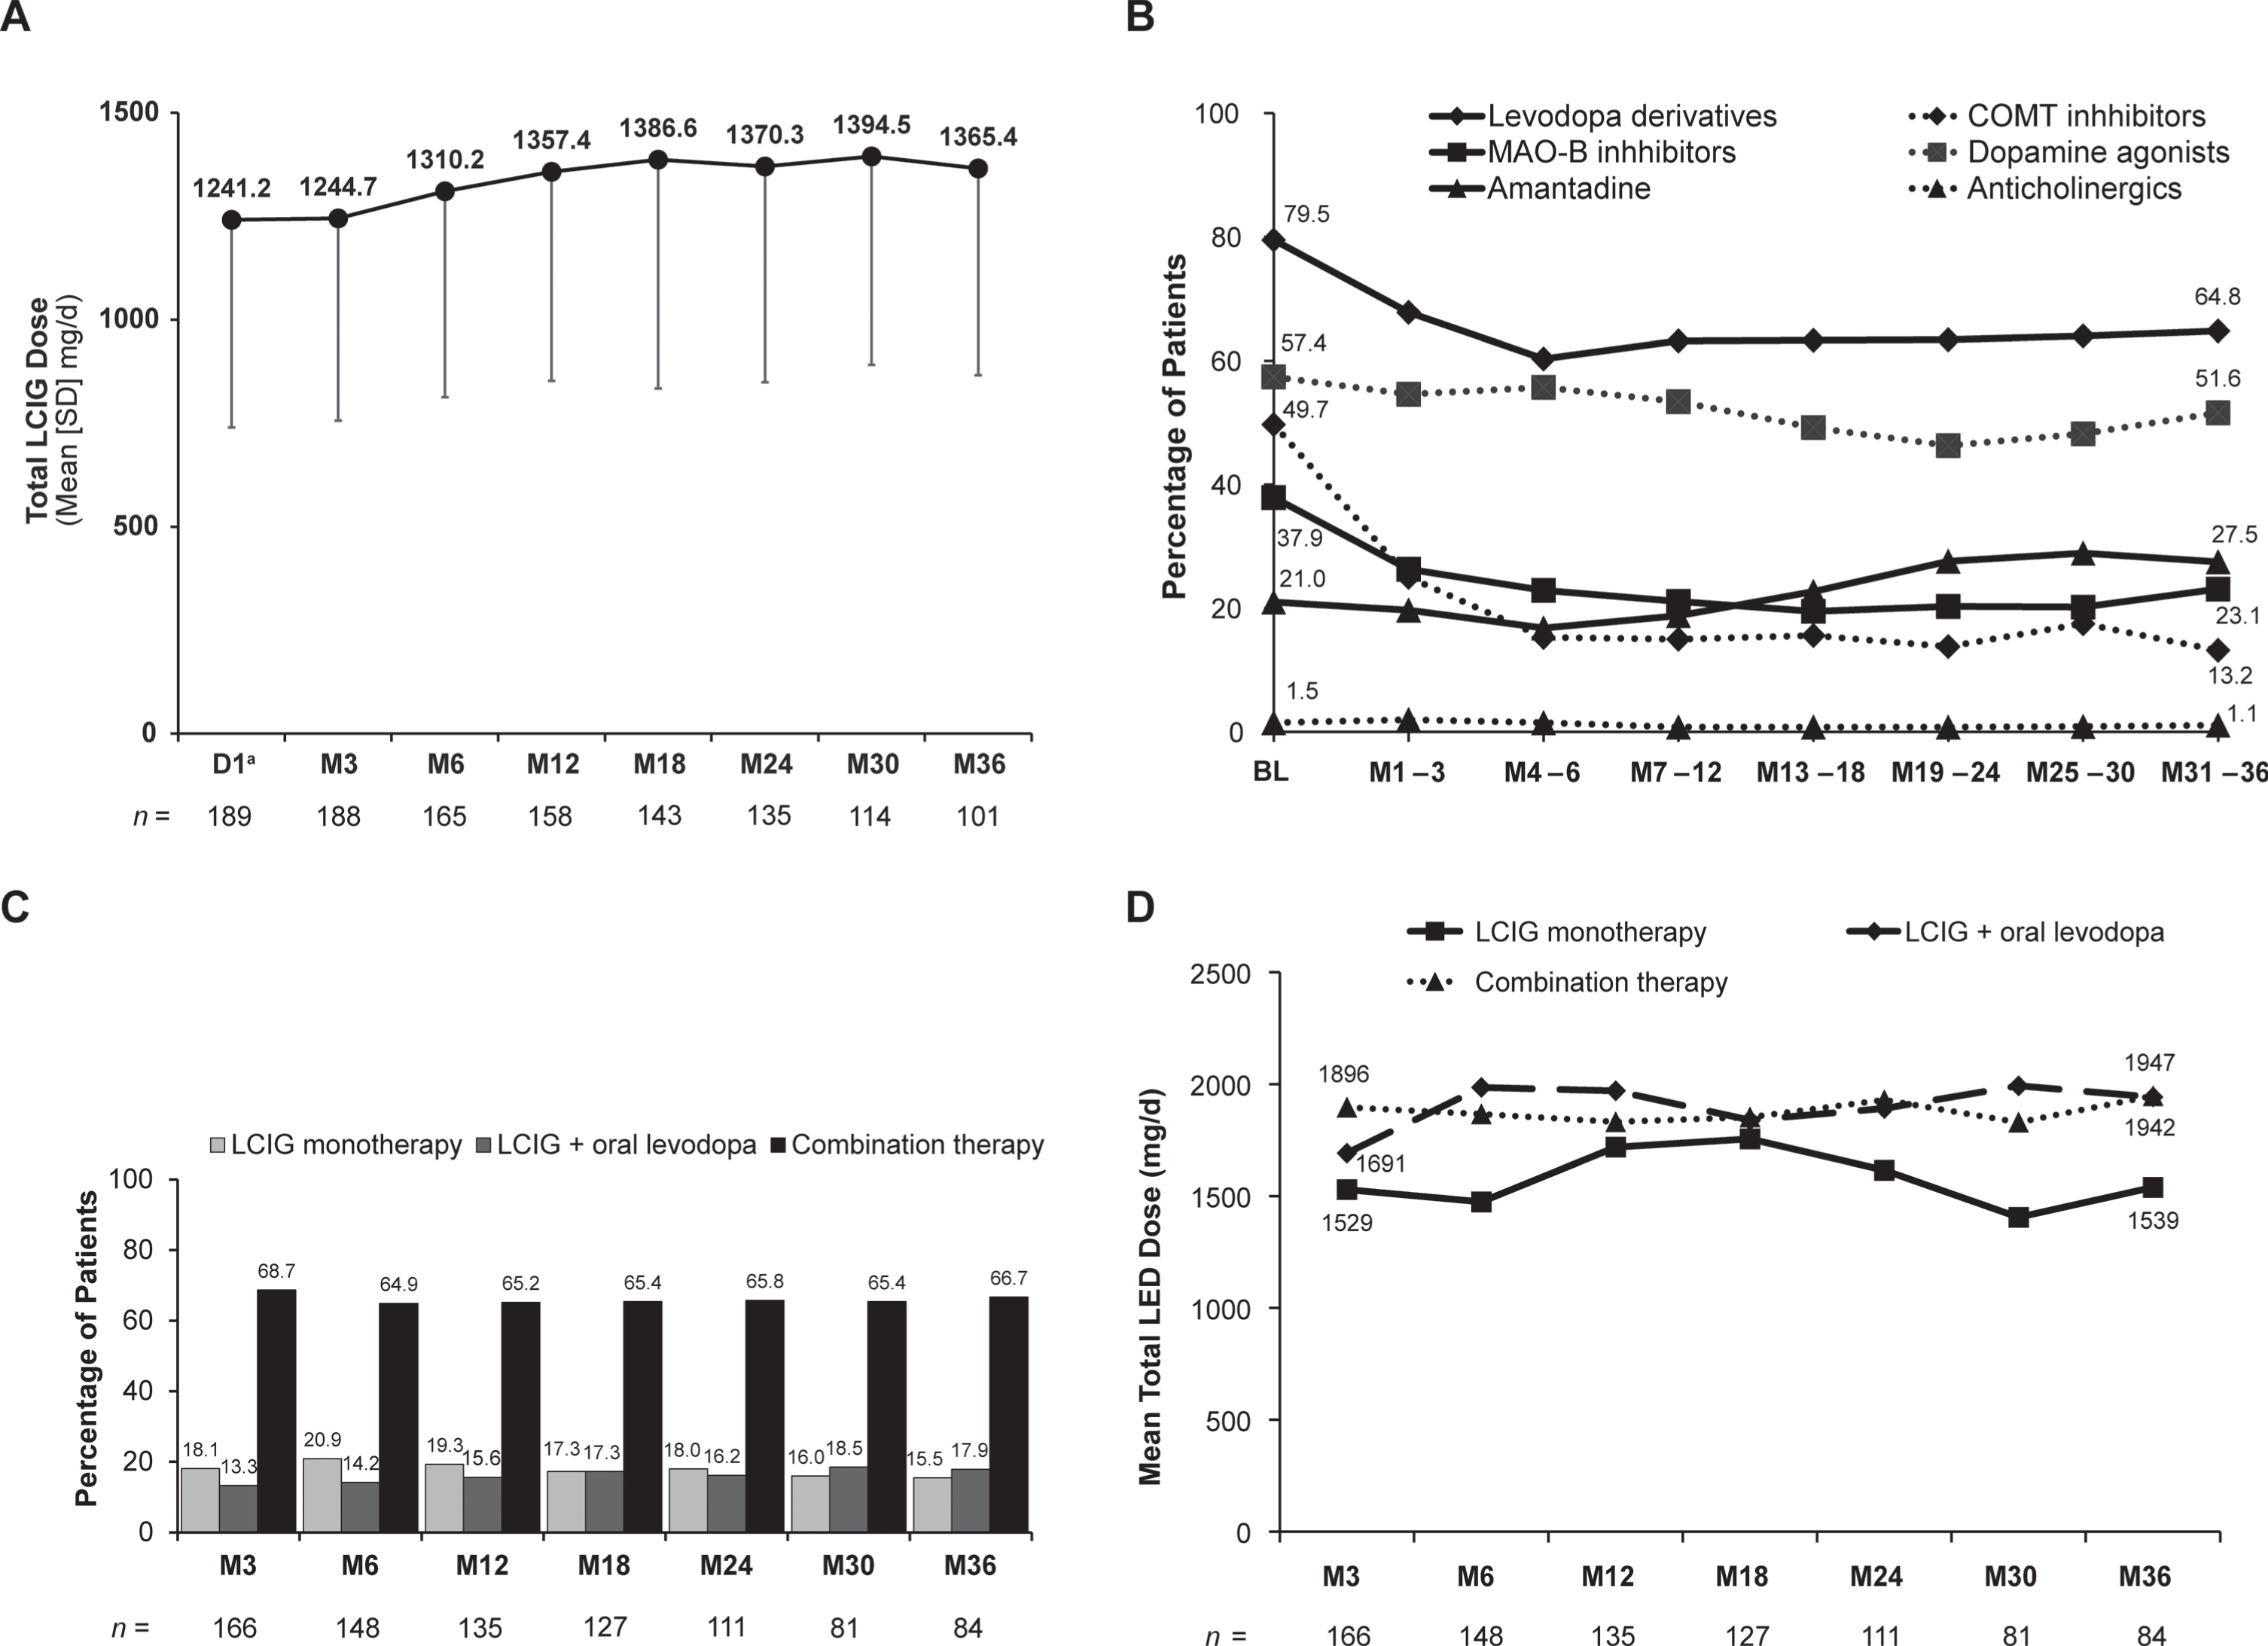 Stability of therapy over time. (A) LCIG dose, (B) anti-PD comedications, (C) monotherapy vs. combination therapy, and (D) total levodopa equivalent dose. aOnly patients who participated in the preceding nasojejunal test phase were assessed at D1. BL, baseline; COMT, catechol-O-methyltransferase; D, day; LCIG, levodopa-carbidopa intestinal gel; LED, levodopa equivalent dose; M, month; MAO-B, monoamine oxidase-B; PD, Parkinson’s disease; SD, standard deviation.